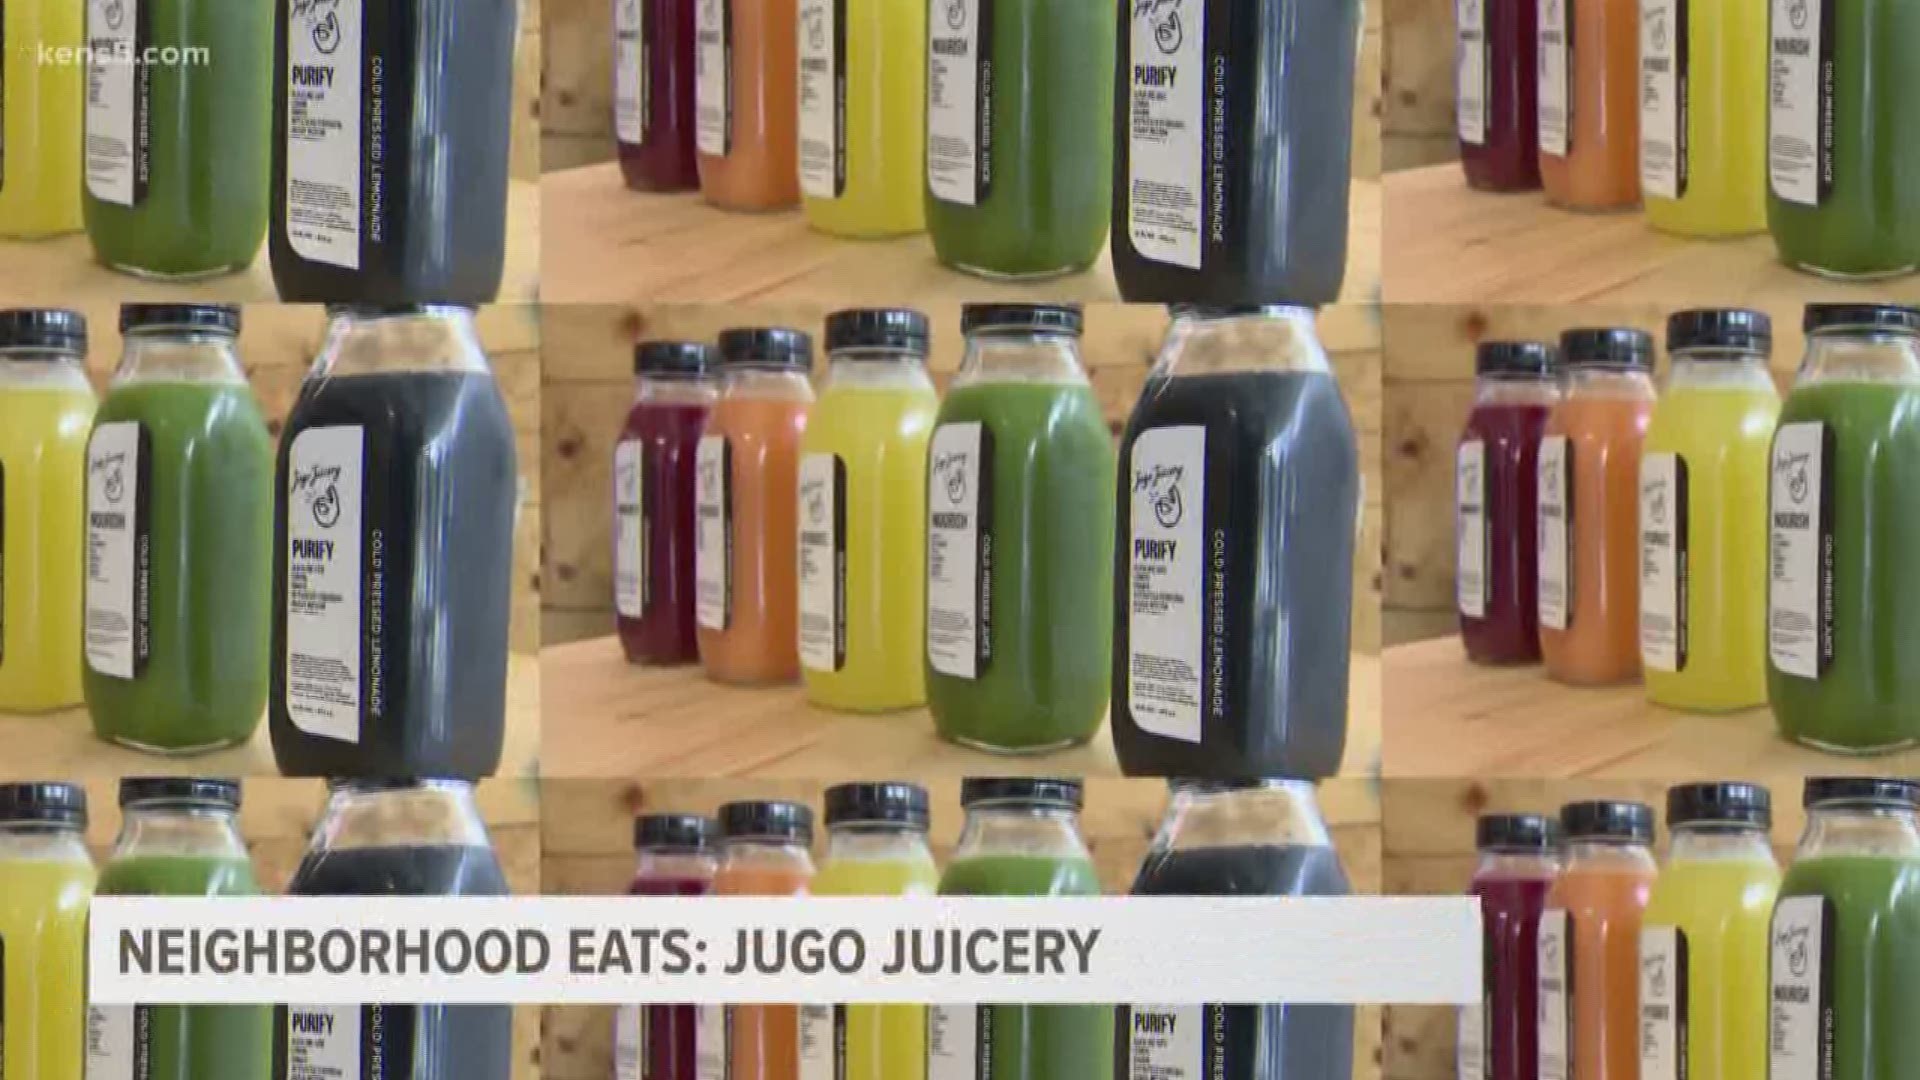 Jugo Juicery started from a Christmas gift!